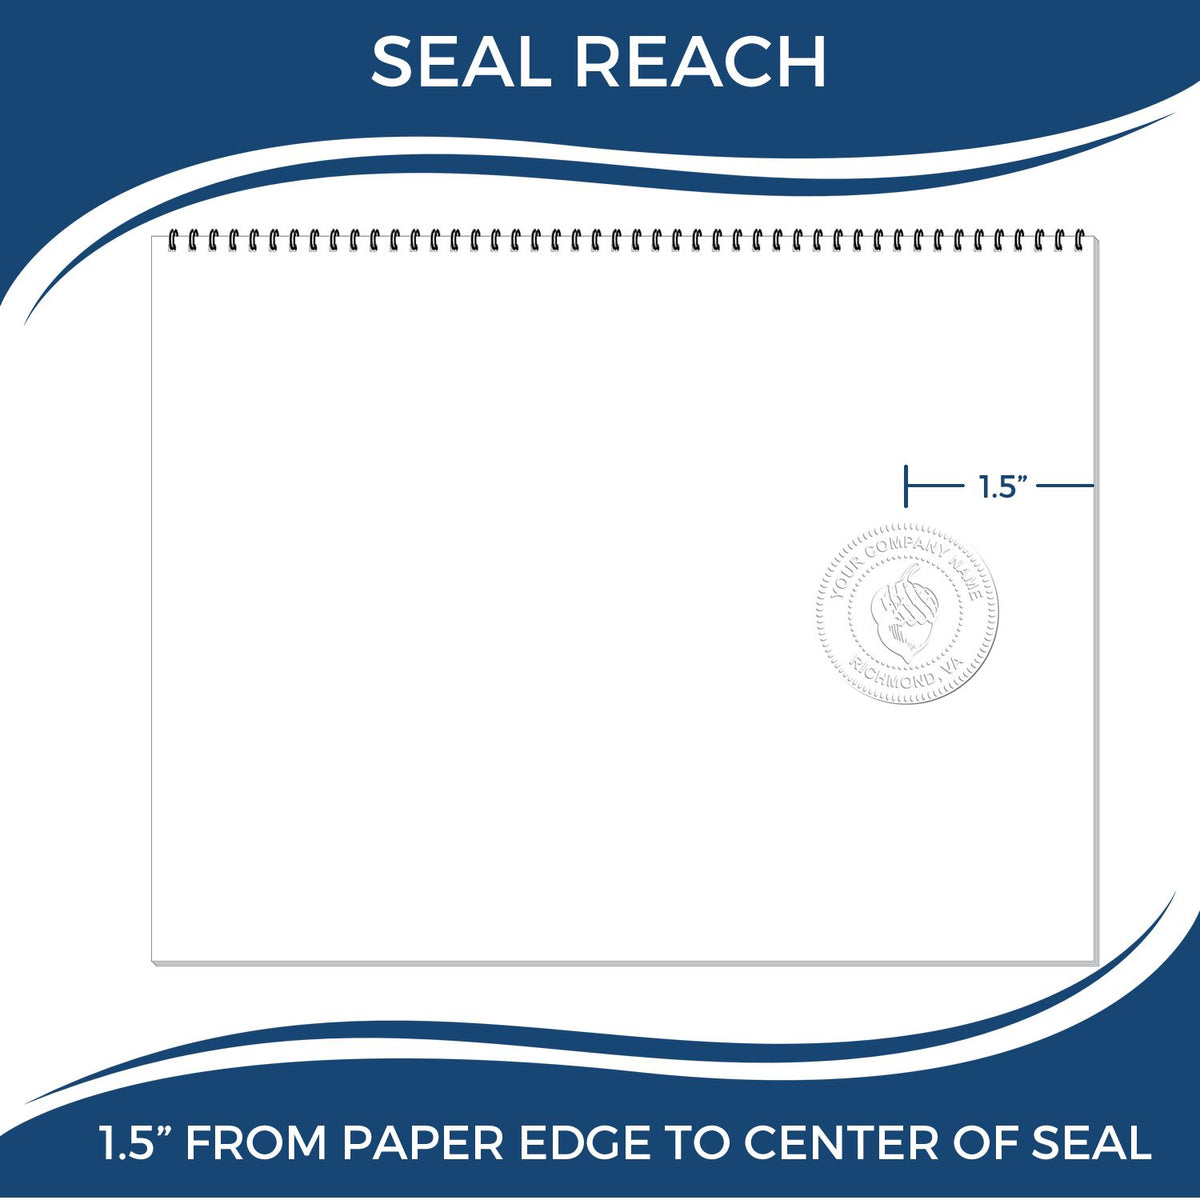 An infographic showing the seal reach which is represented by a ruler and a miniature seal image of the Hybrid Texas Geologist Seal